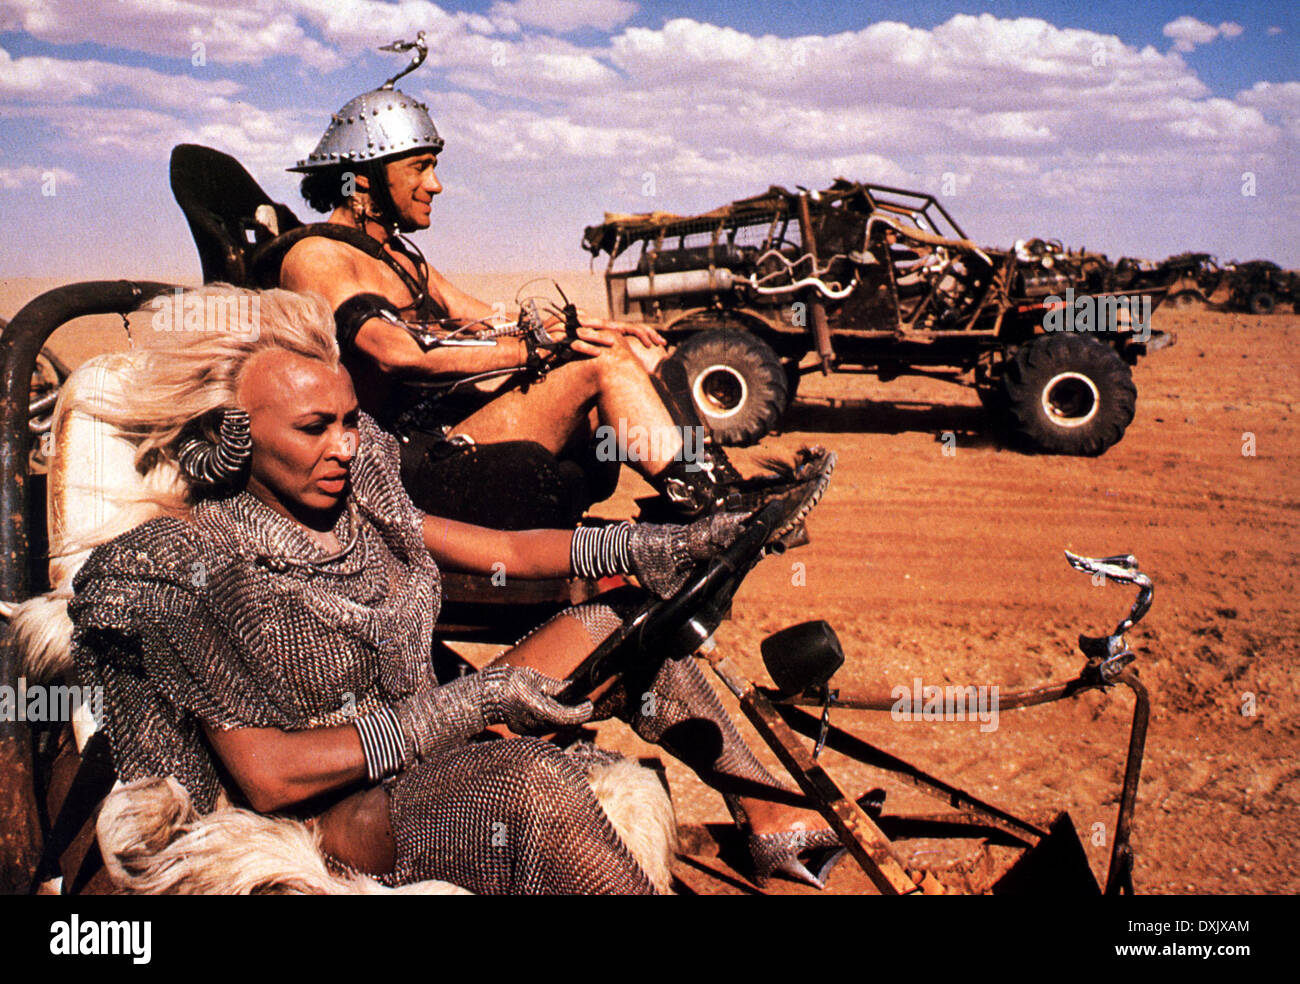 MAD MAX BEYOND THUNDERDOME (US/AUS 1985) KENNEDY MILLER PROD Banque D'Images